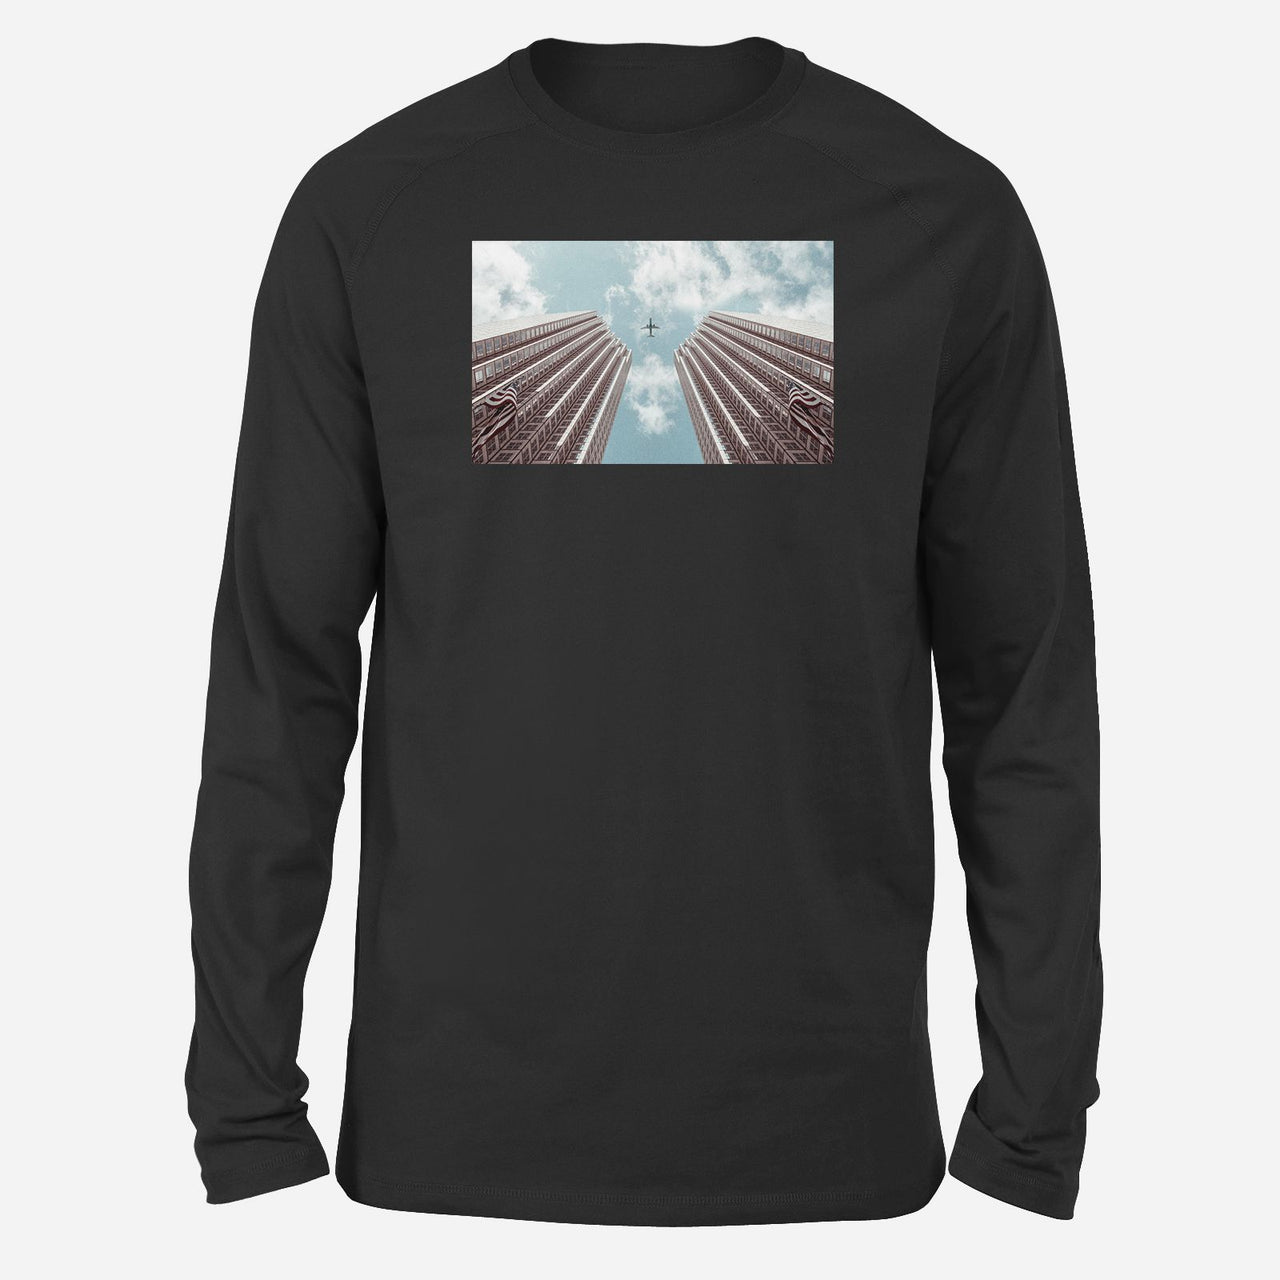 Airplane Flying over Big Buildings Designed Long-Sleeve T-Shirts